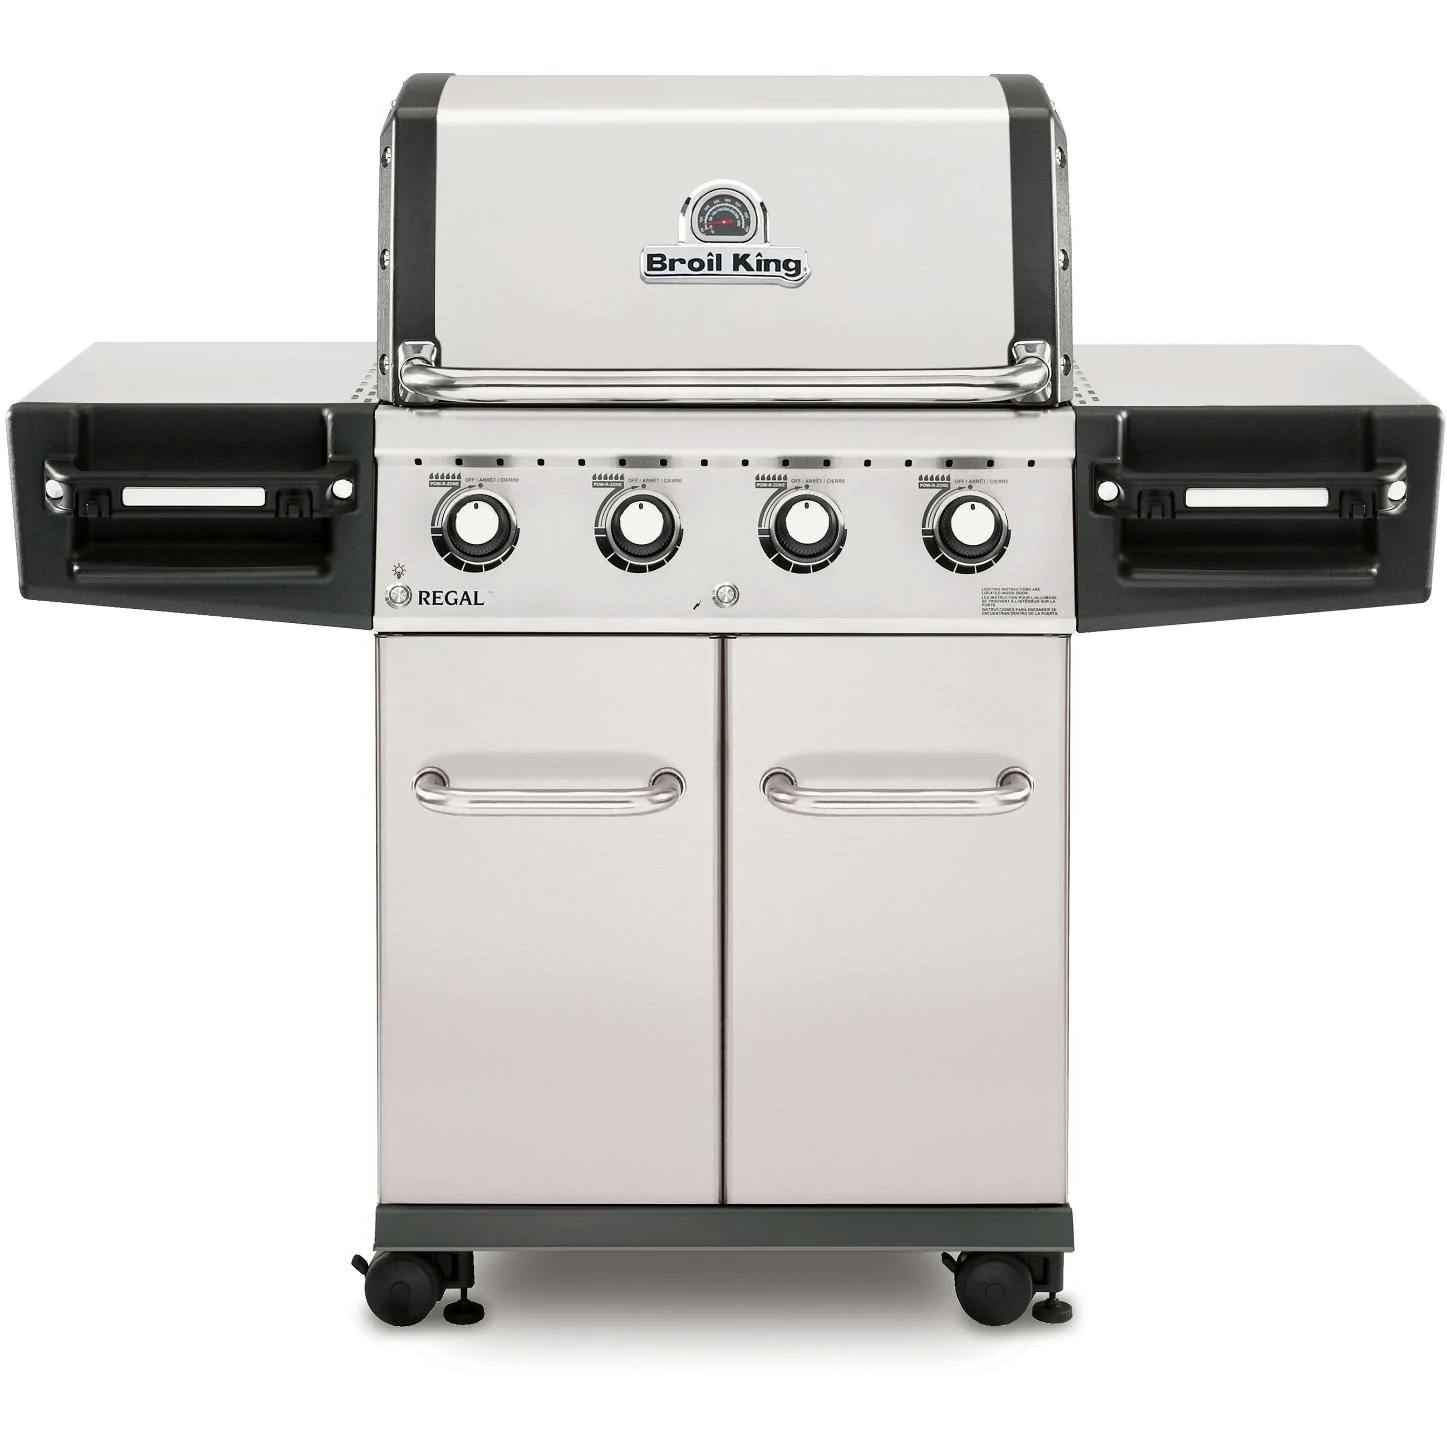 Broil King Regal S420 Pro Gas Grill Stainless Steel